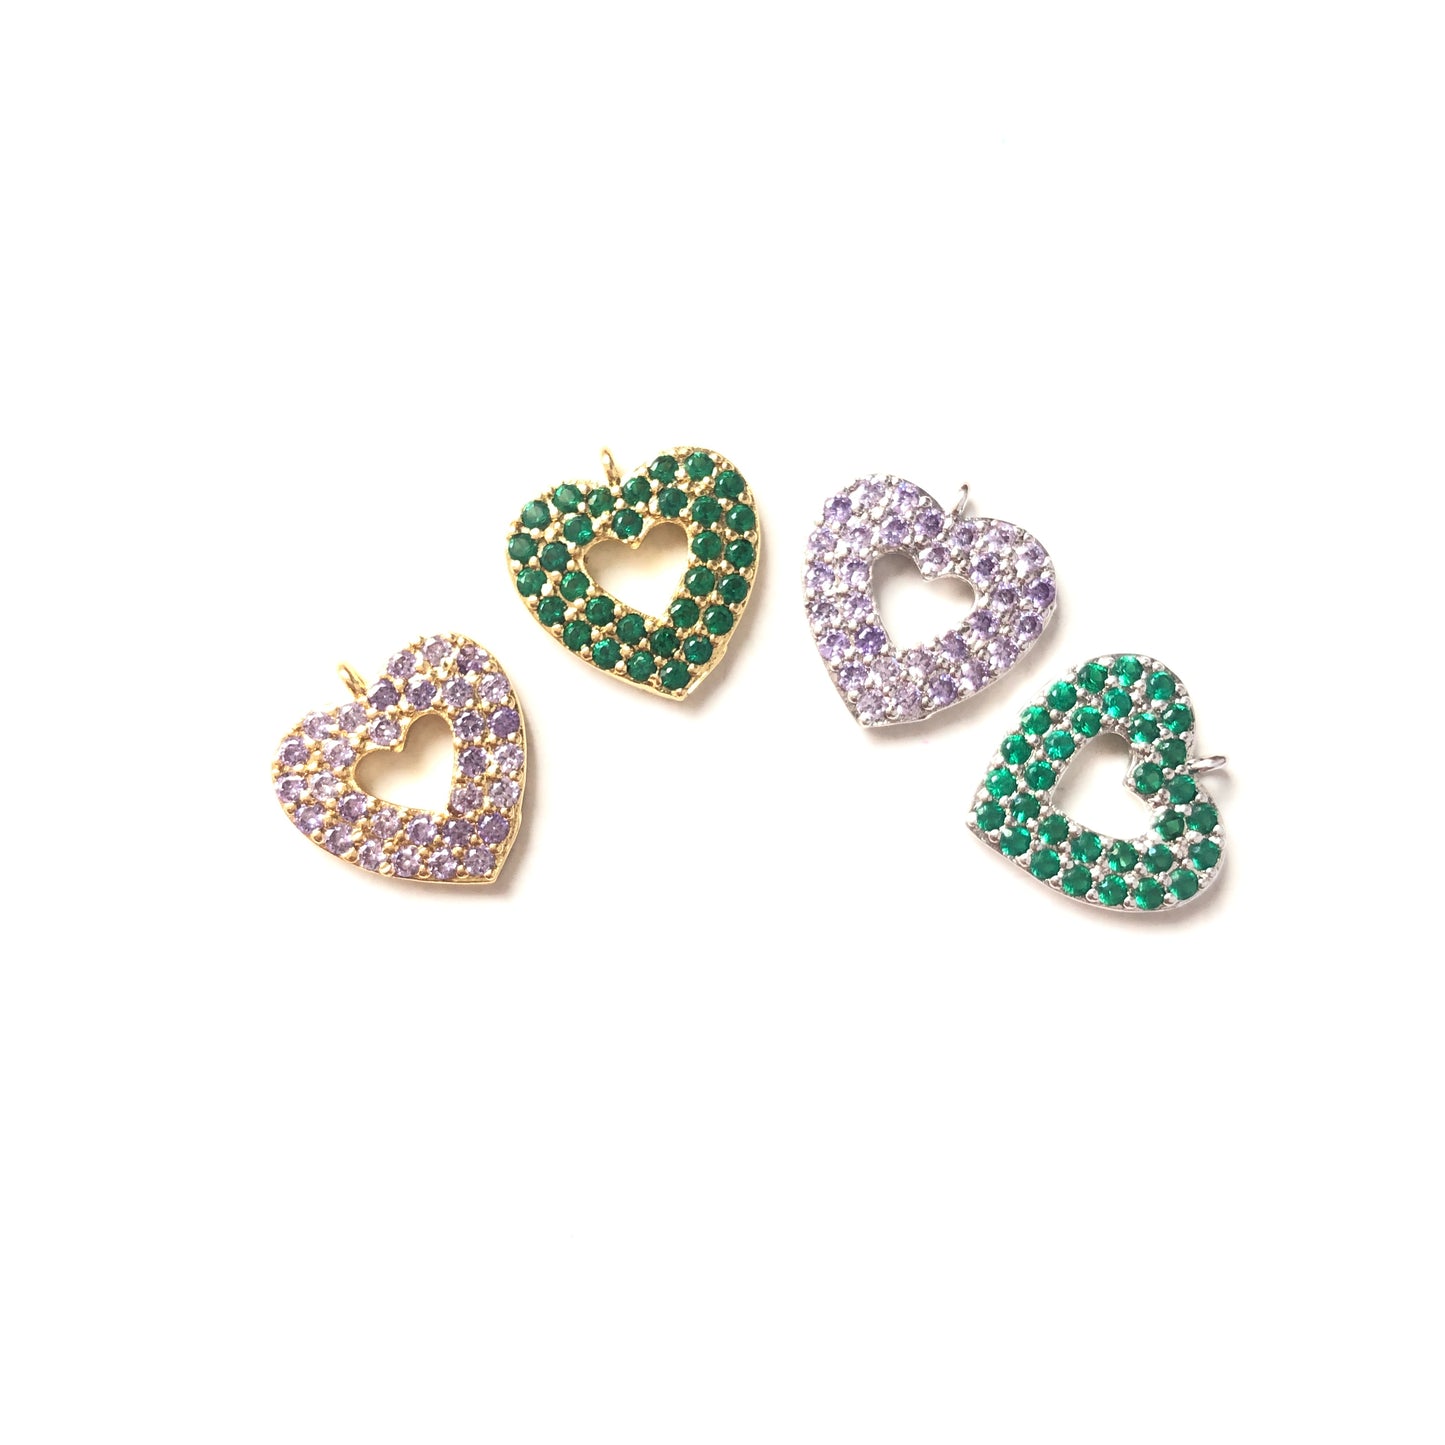 10pcs/lot 15*14mm Purple & Green CZ Paved Heart Charms CZ Paved Charms Colorful Zirconia Hearts Small Sizes Charms Beads Beyond